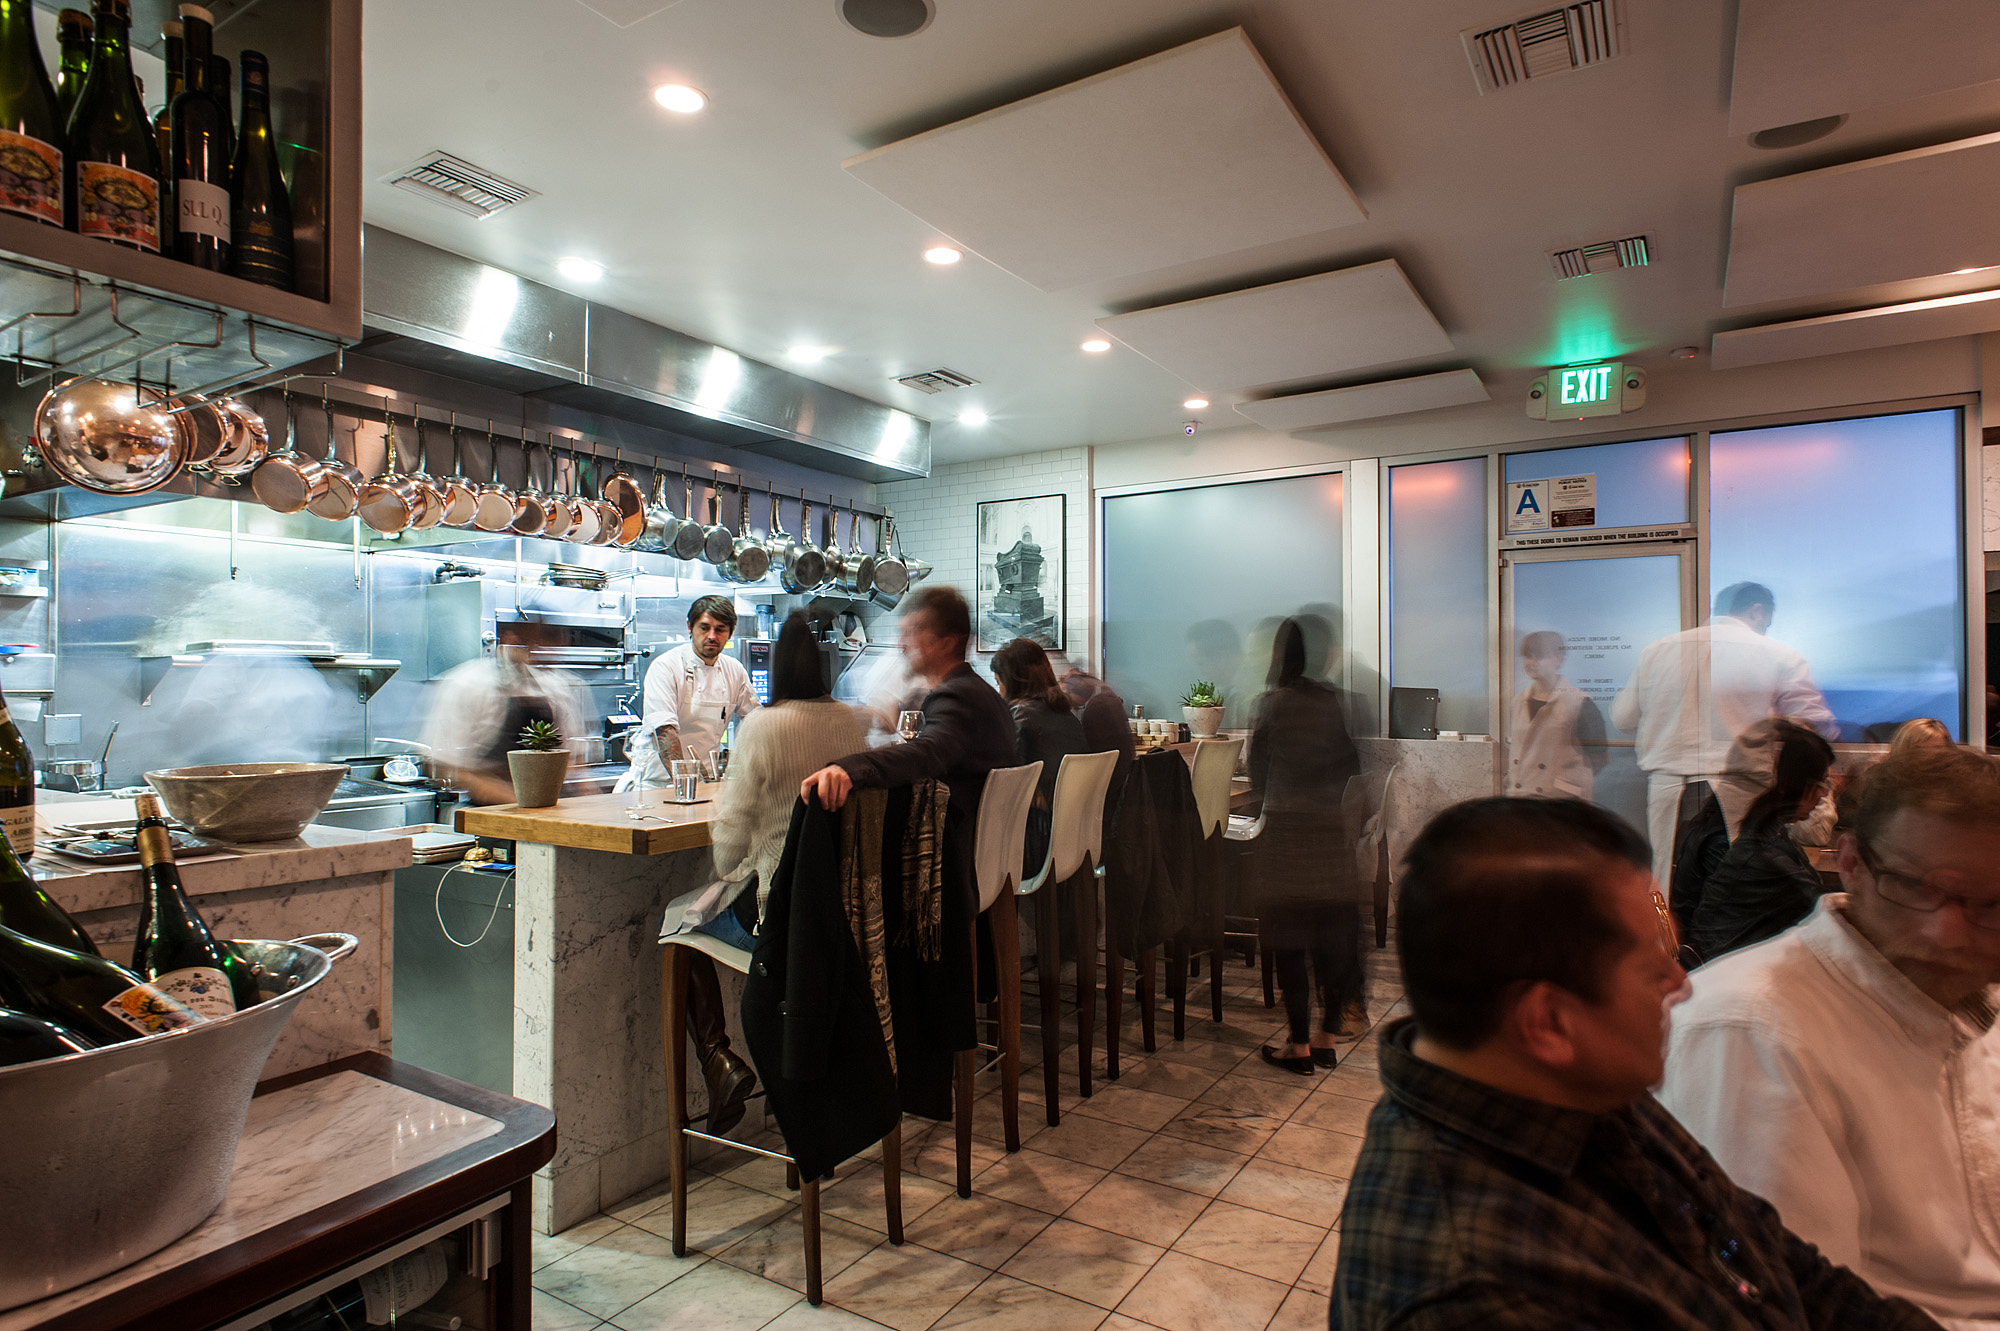 A busy night for diners at one of LA’s best tasting menu restaurants.